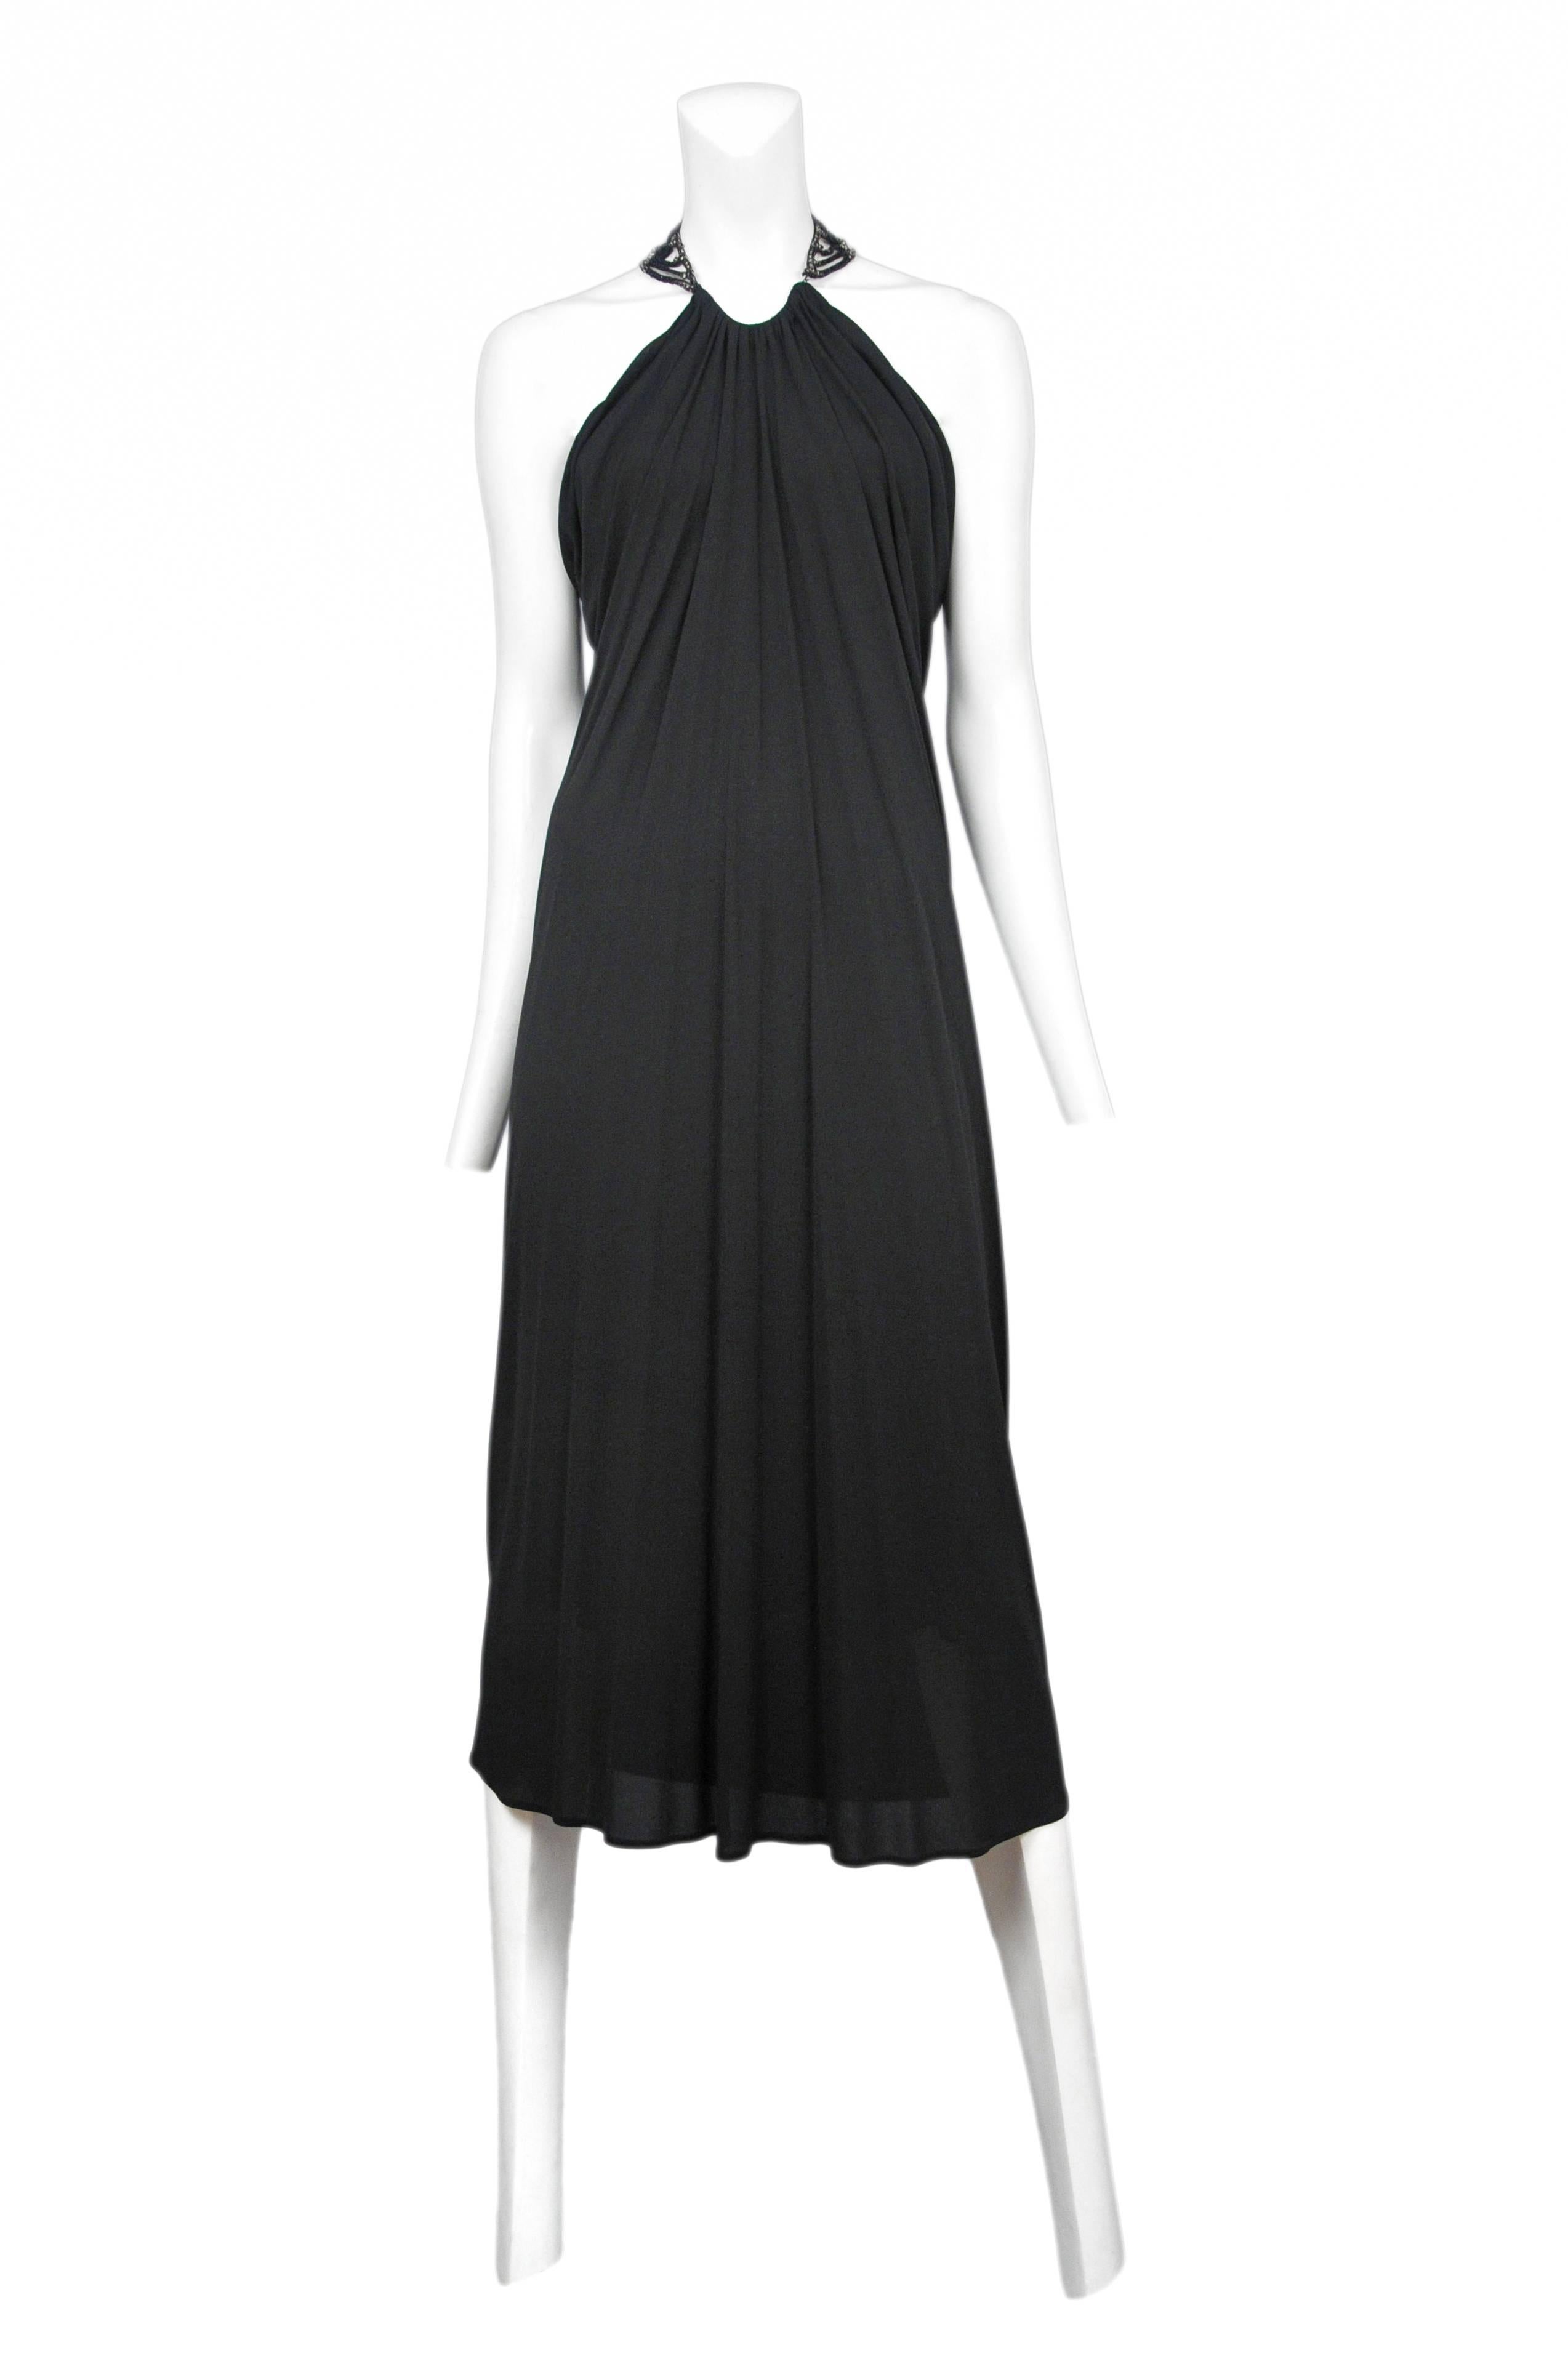 Black beaded necklace with attached black jersey drape dress. The Man Who Knew Too Much Collection AW 2005.

Please contact for additional information or photos.